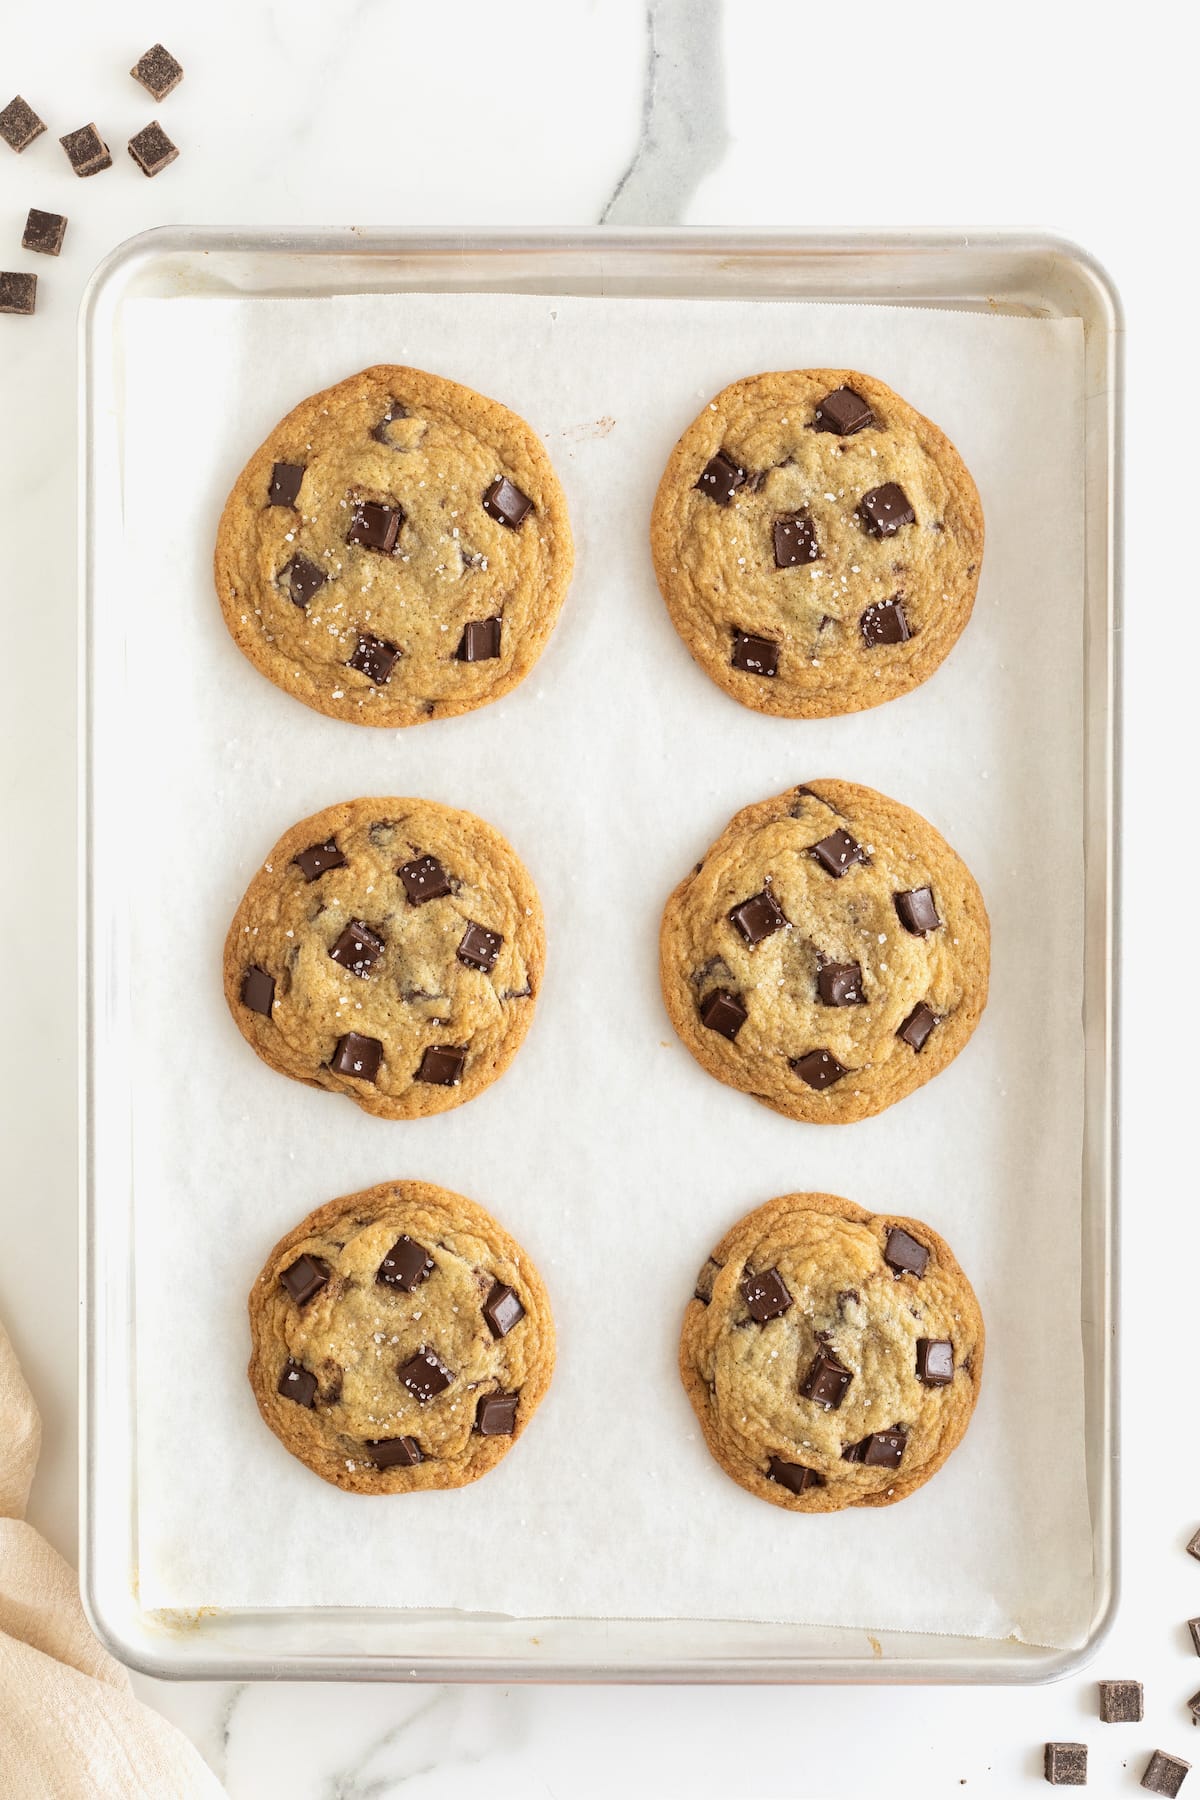 Baked chocolate chunk cookies on a parchment lined baking sheet.